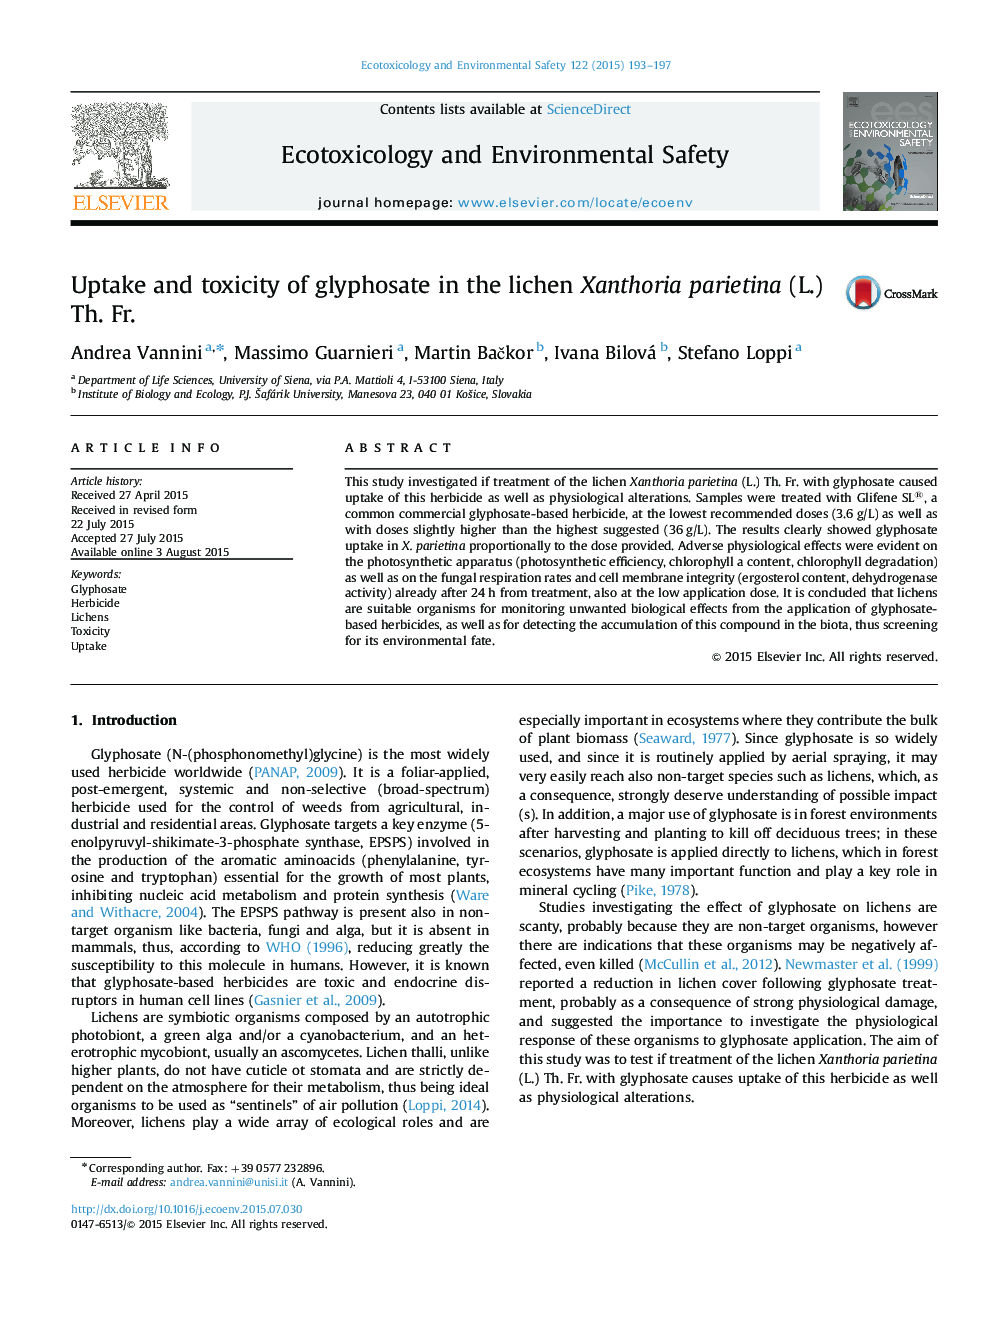 Uptake and toxicity of glyphosate in the lichen Xanthoria parietina (L.) Th. Fr.